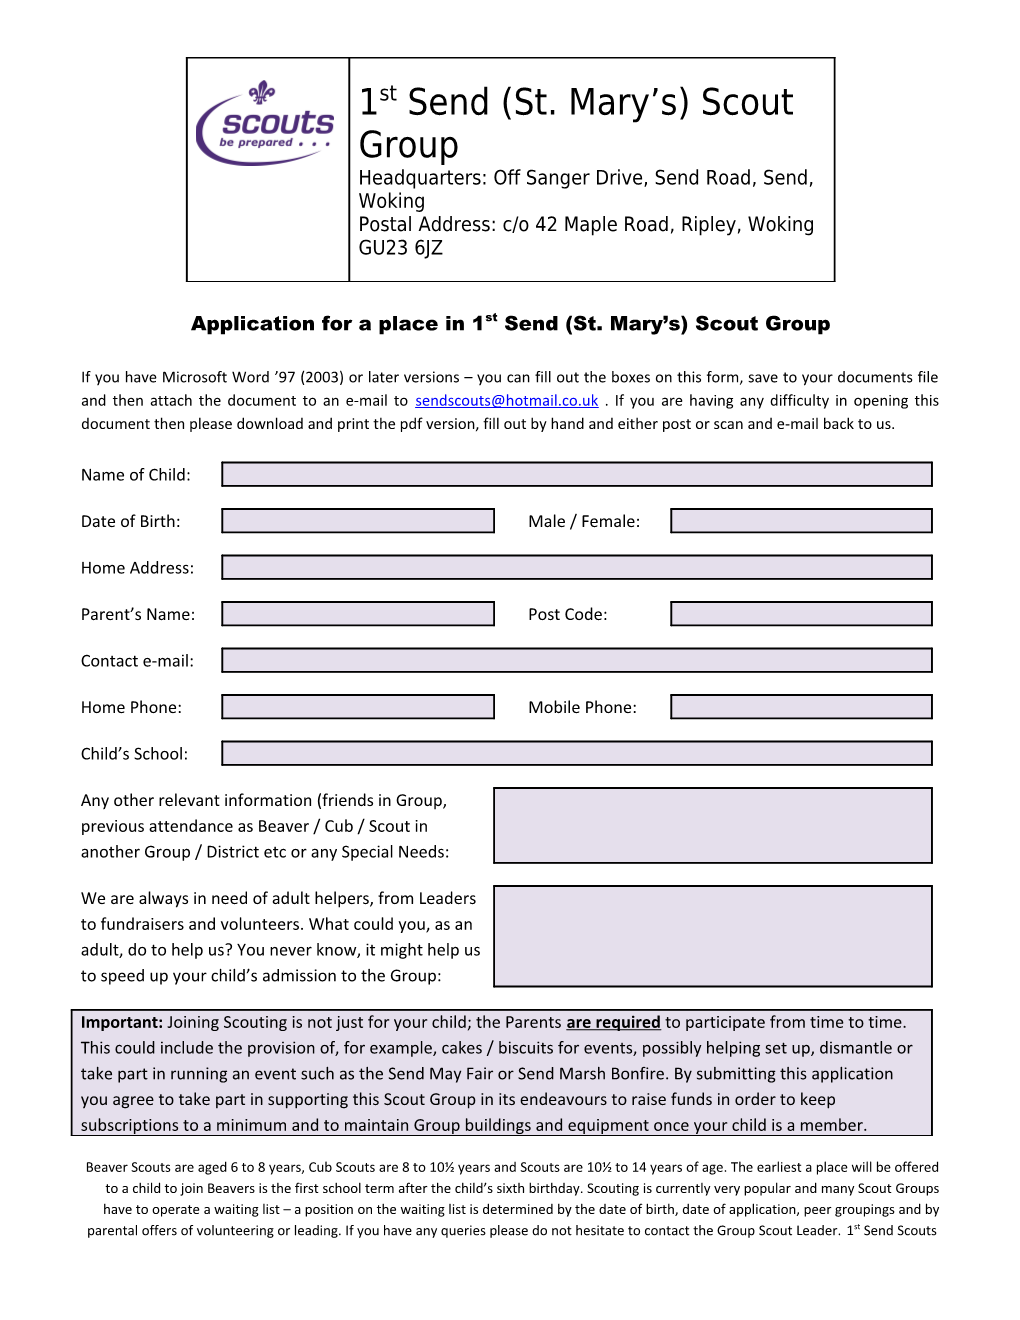 Application for a Place in 1St Send (St. Mary S) Scout Group